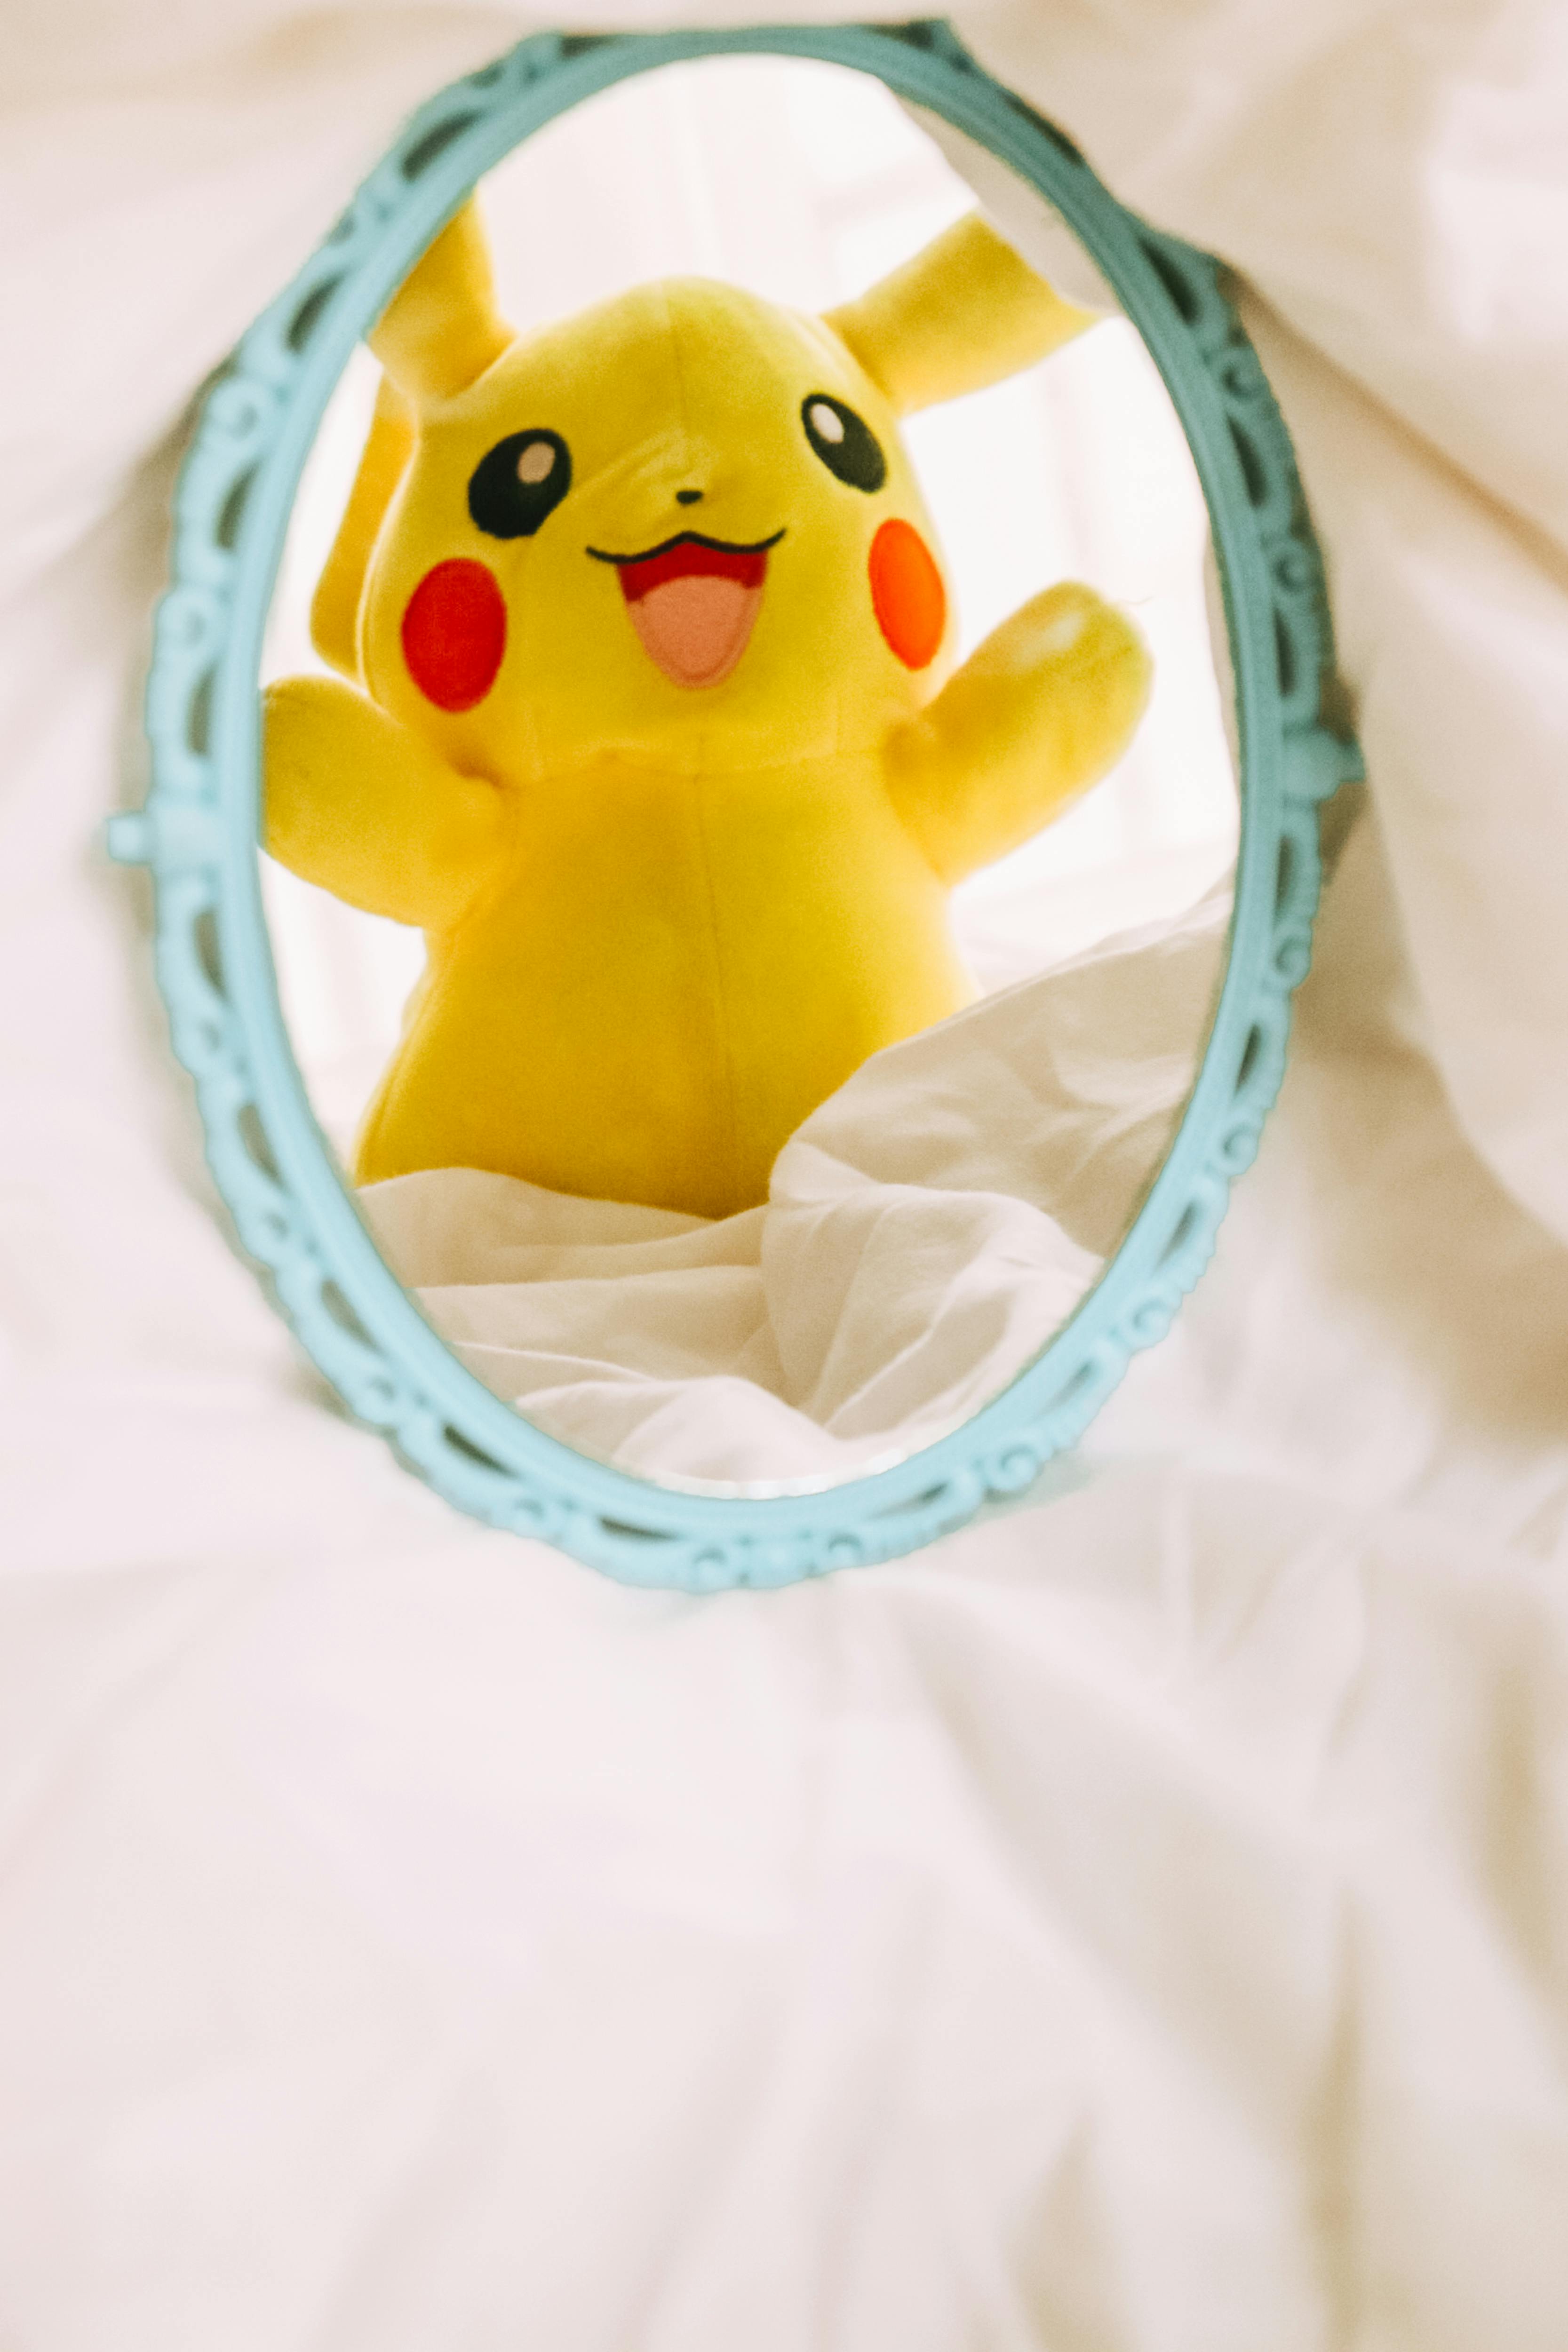 Pikachu Photos, Download The BEST Free Pikachu Stock Photos & HD Images